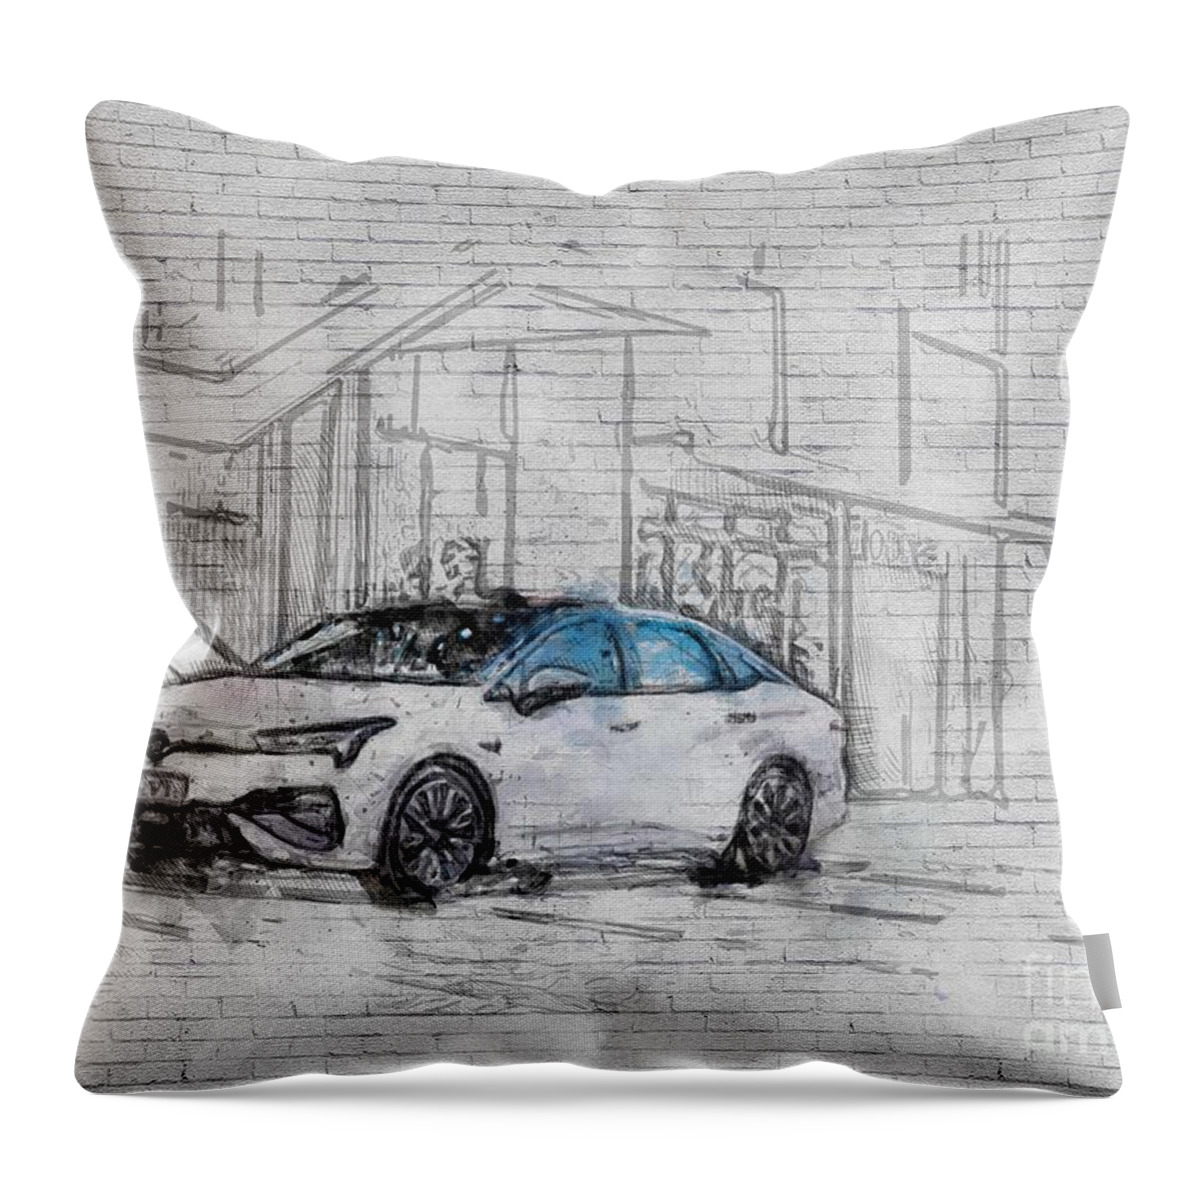  Throw Pillow featuring the digital art Gac Aion S Luxury Cars 2021 Street Chinese by Ashtyn Treutel